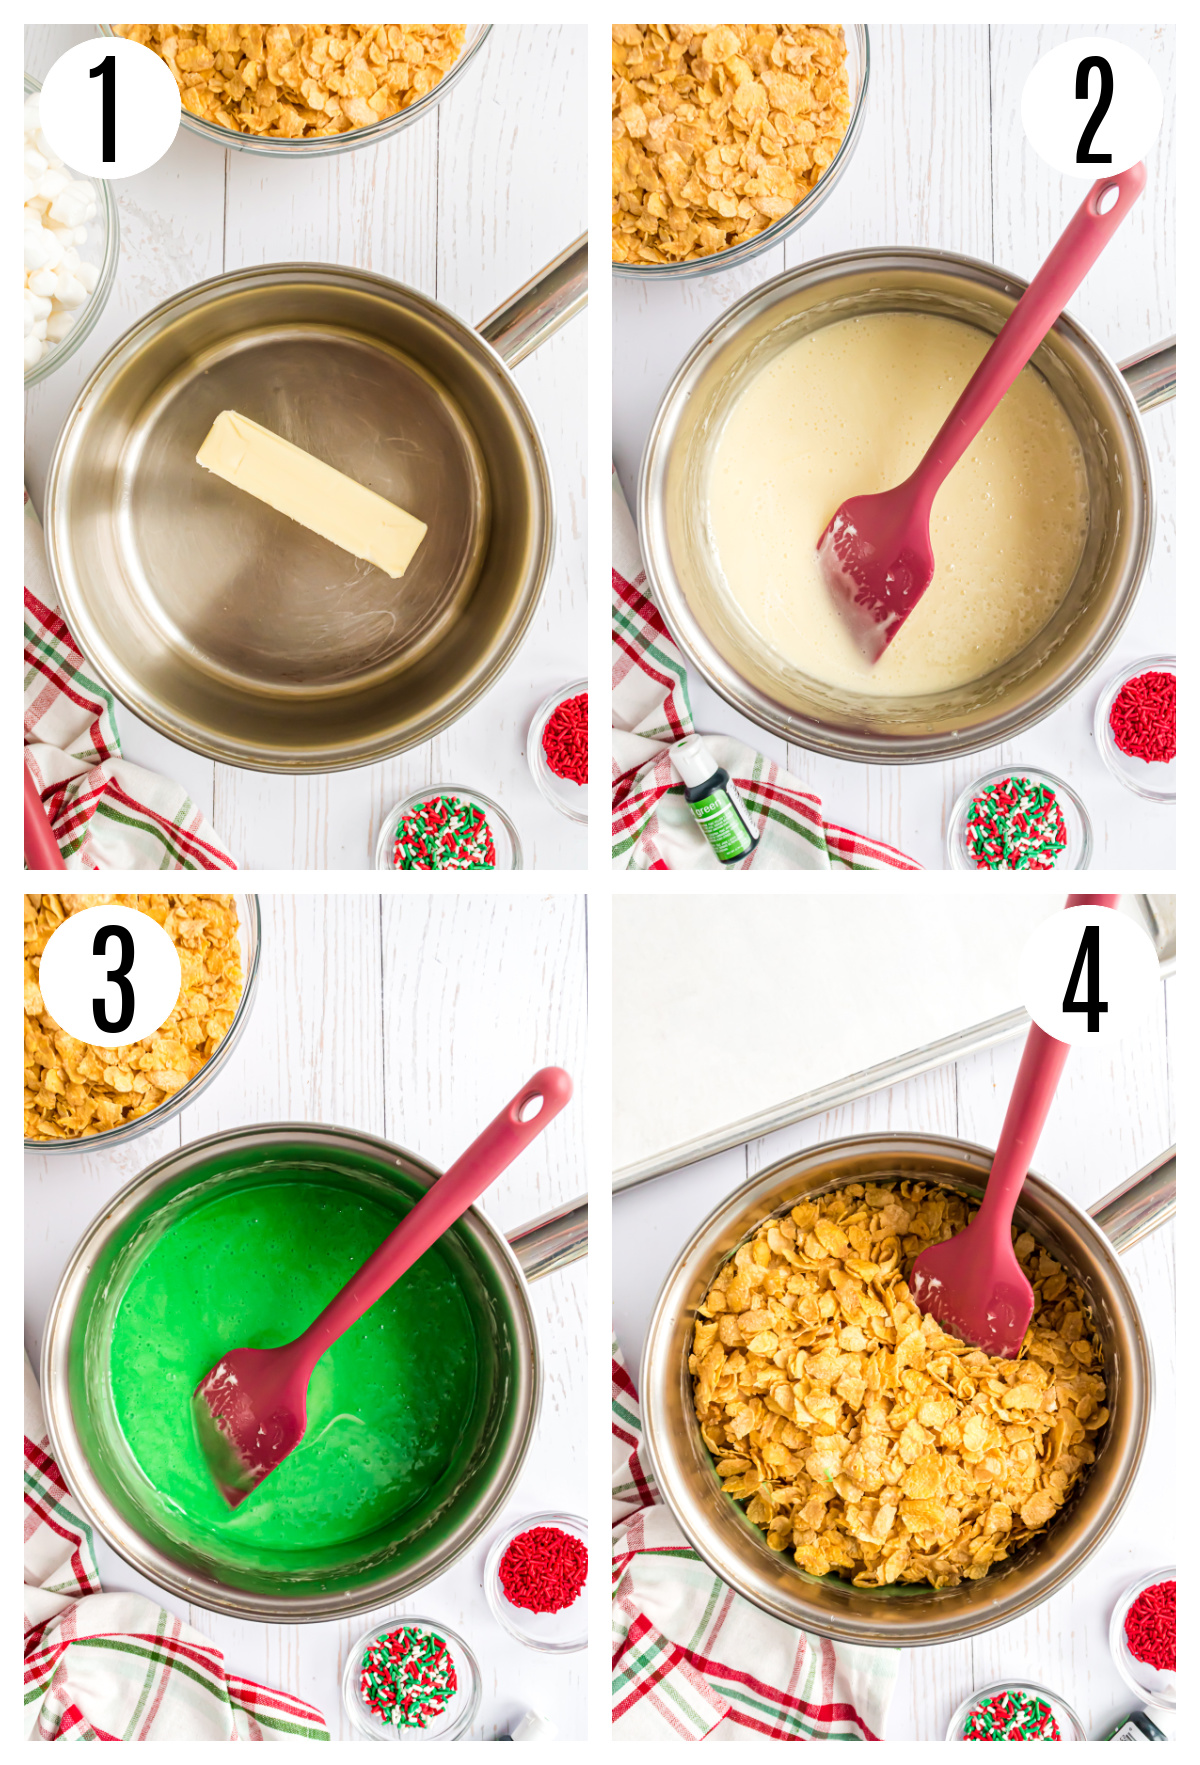 The first four steps in making the Christmas Wreath Cookie recipe include: melting the butter in a saucepan, adding the marshmallows, adding the green food coloring and adding the cornflake cereal.